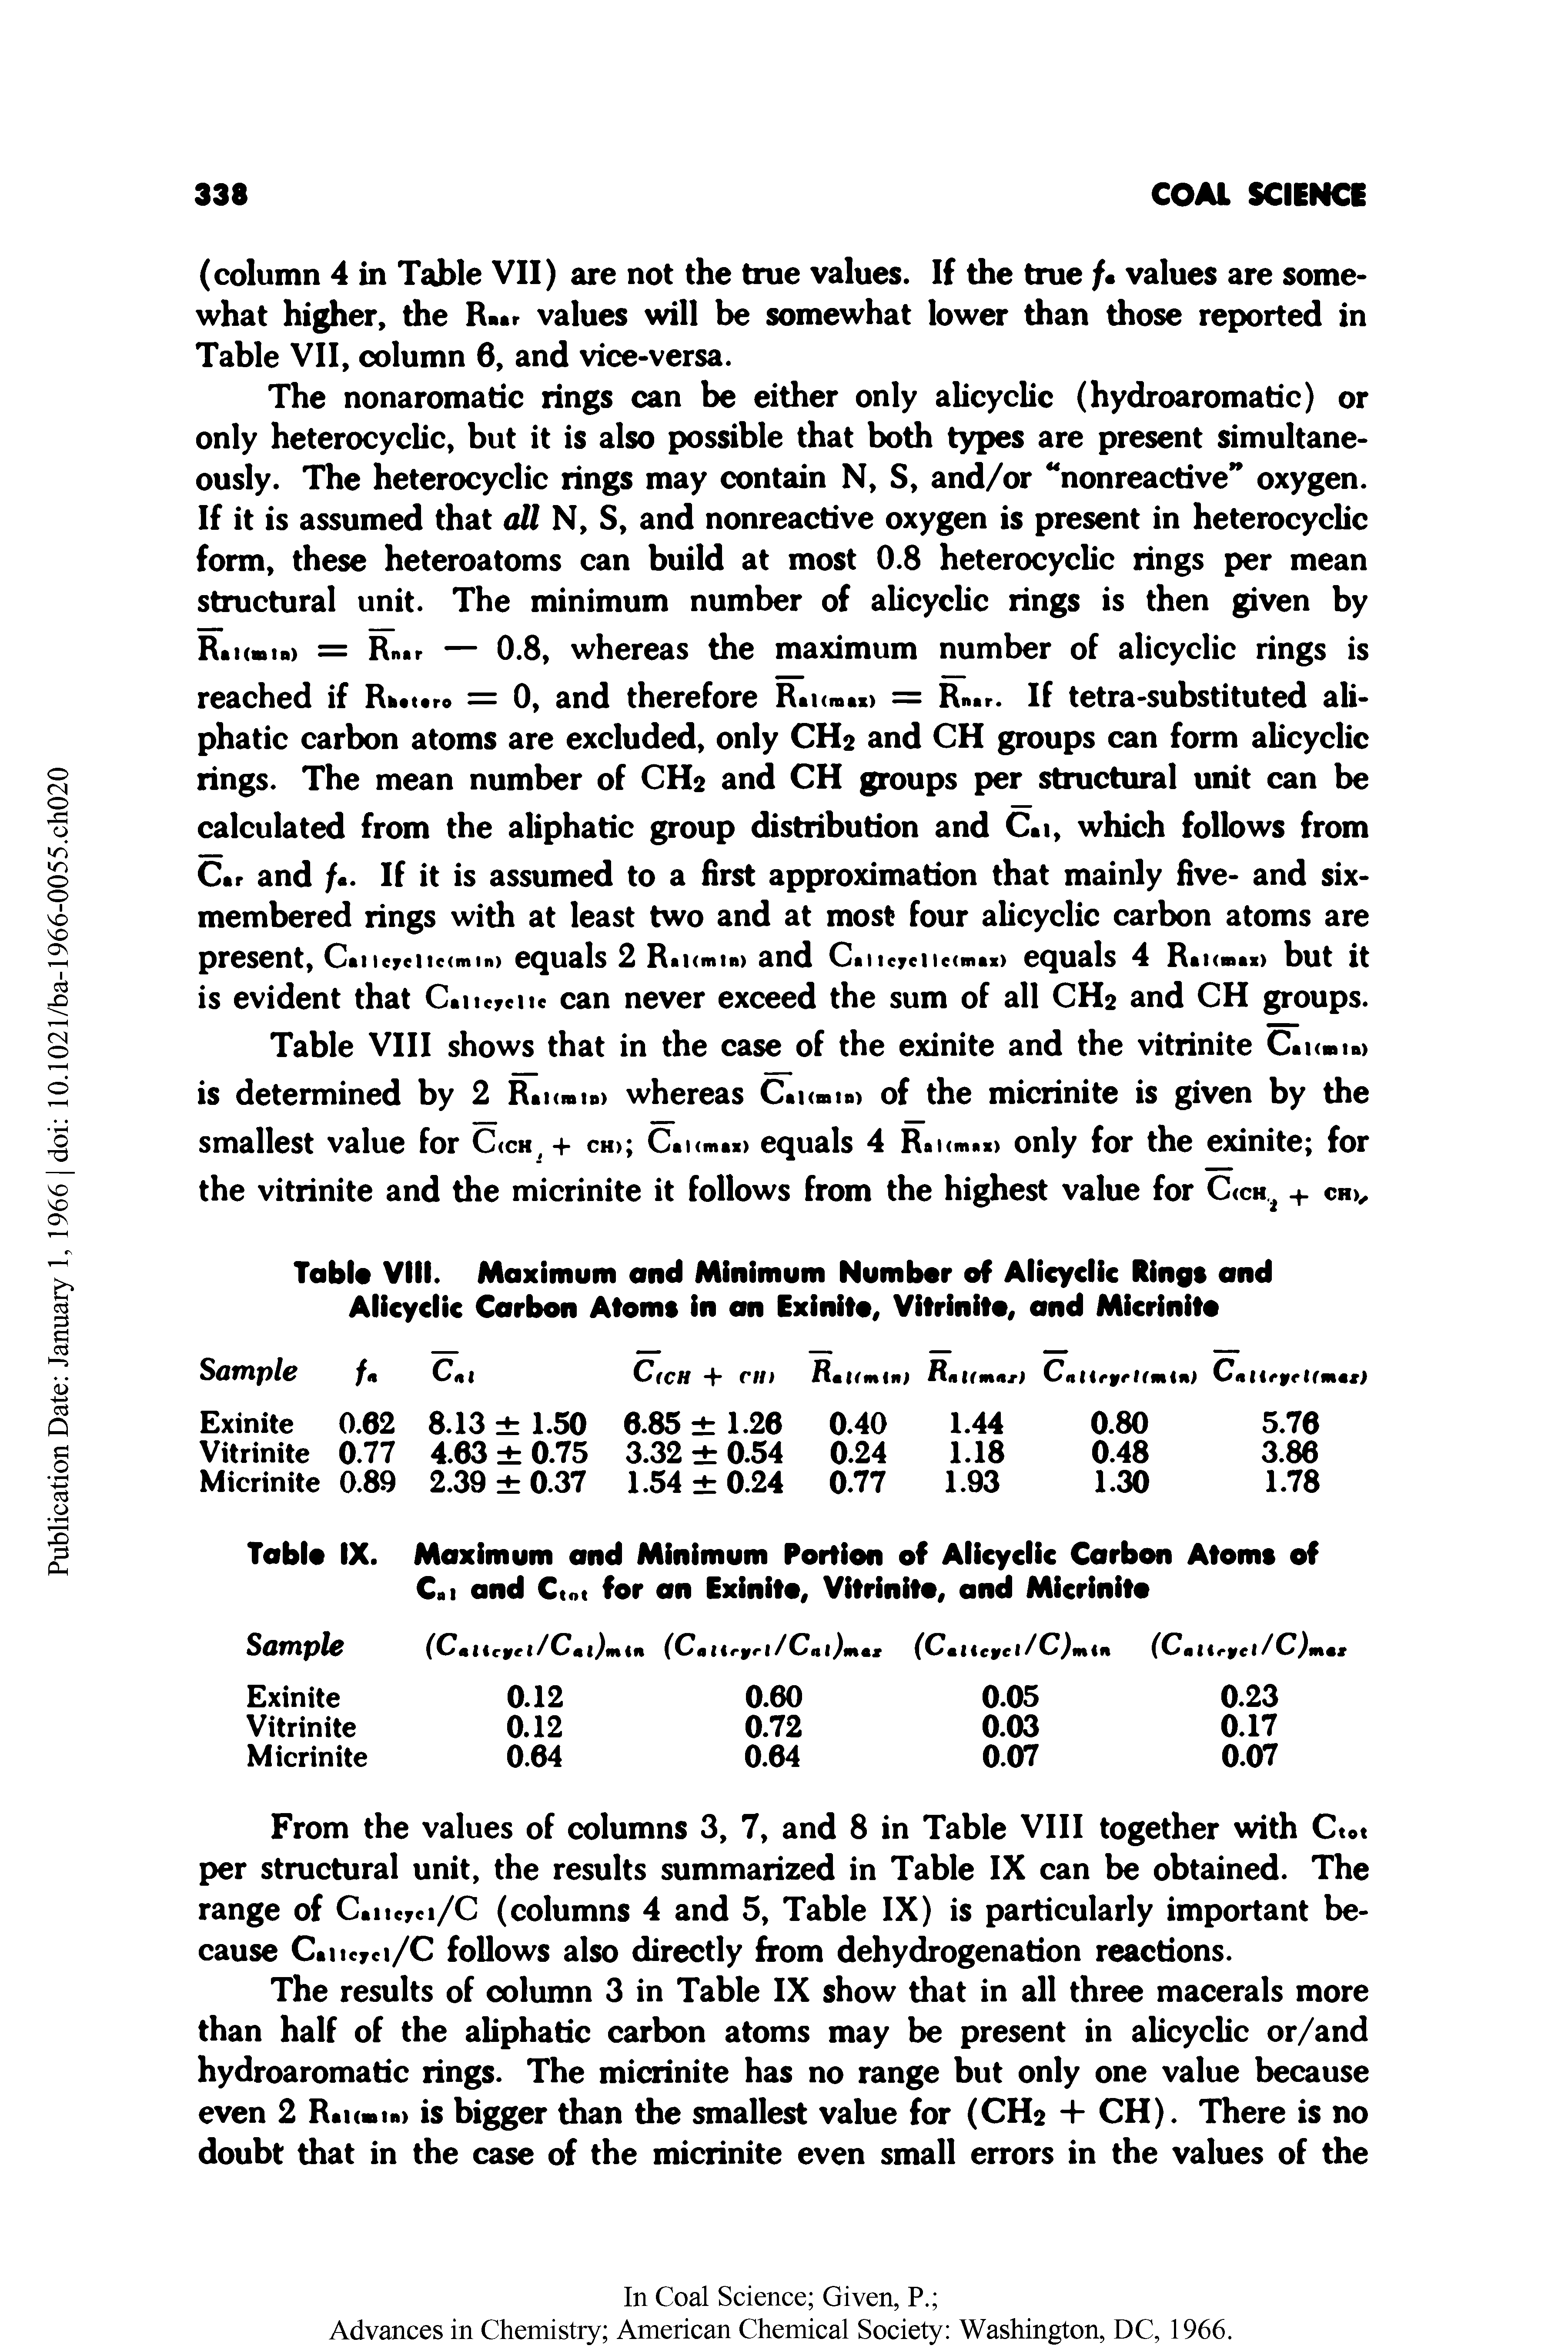 Table VIII. Maximum and Minimum Number of Alicyclic Rings and Alicyclic Carbon Atoms in an Exinite, Vitrinite, and Micrinite...